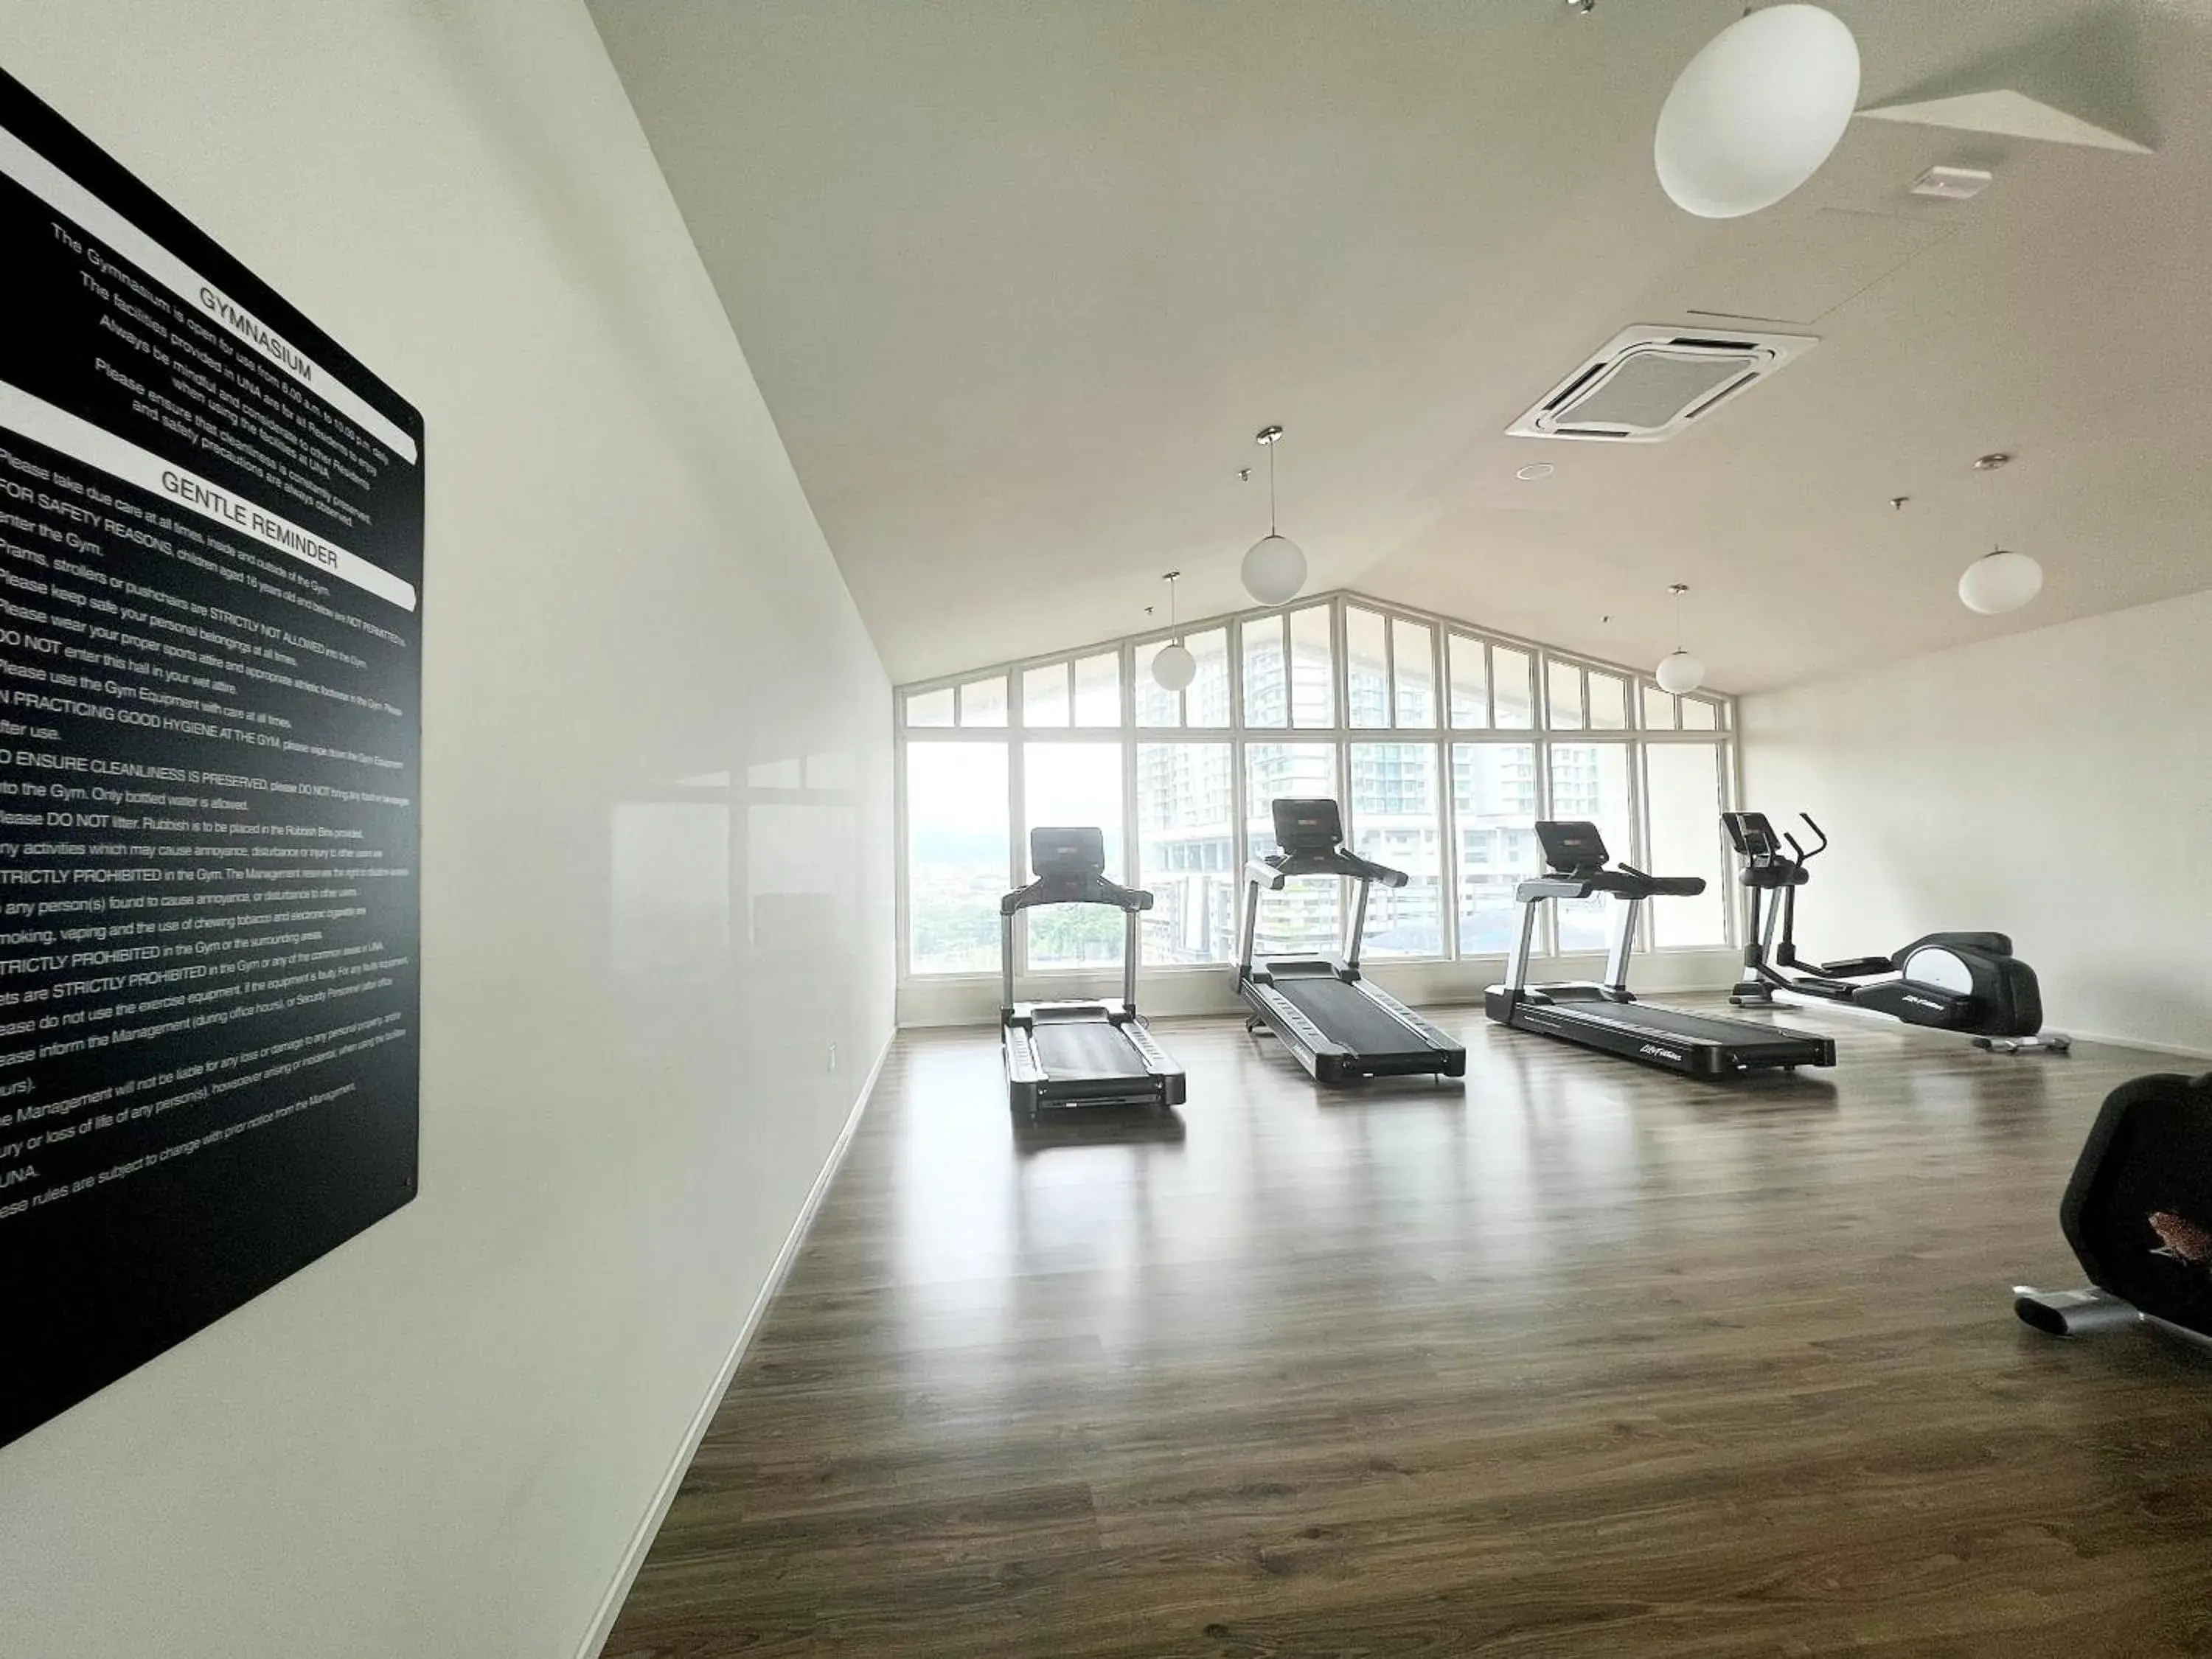 Fitness centre/facilities, Fitness Center/Facilities in Infini Suites@ UNA Residences, Sunway Velocity KL